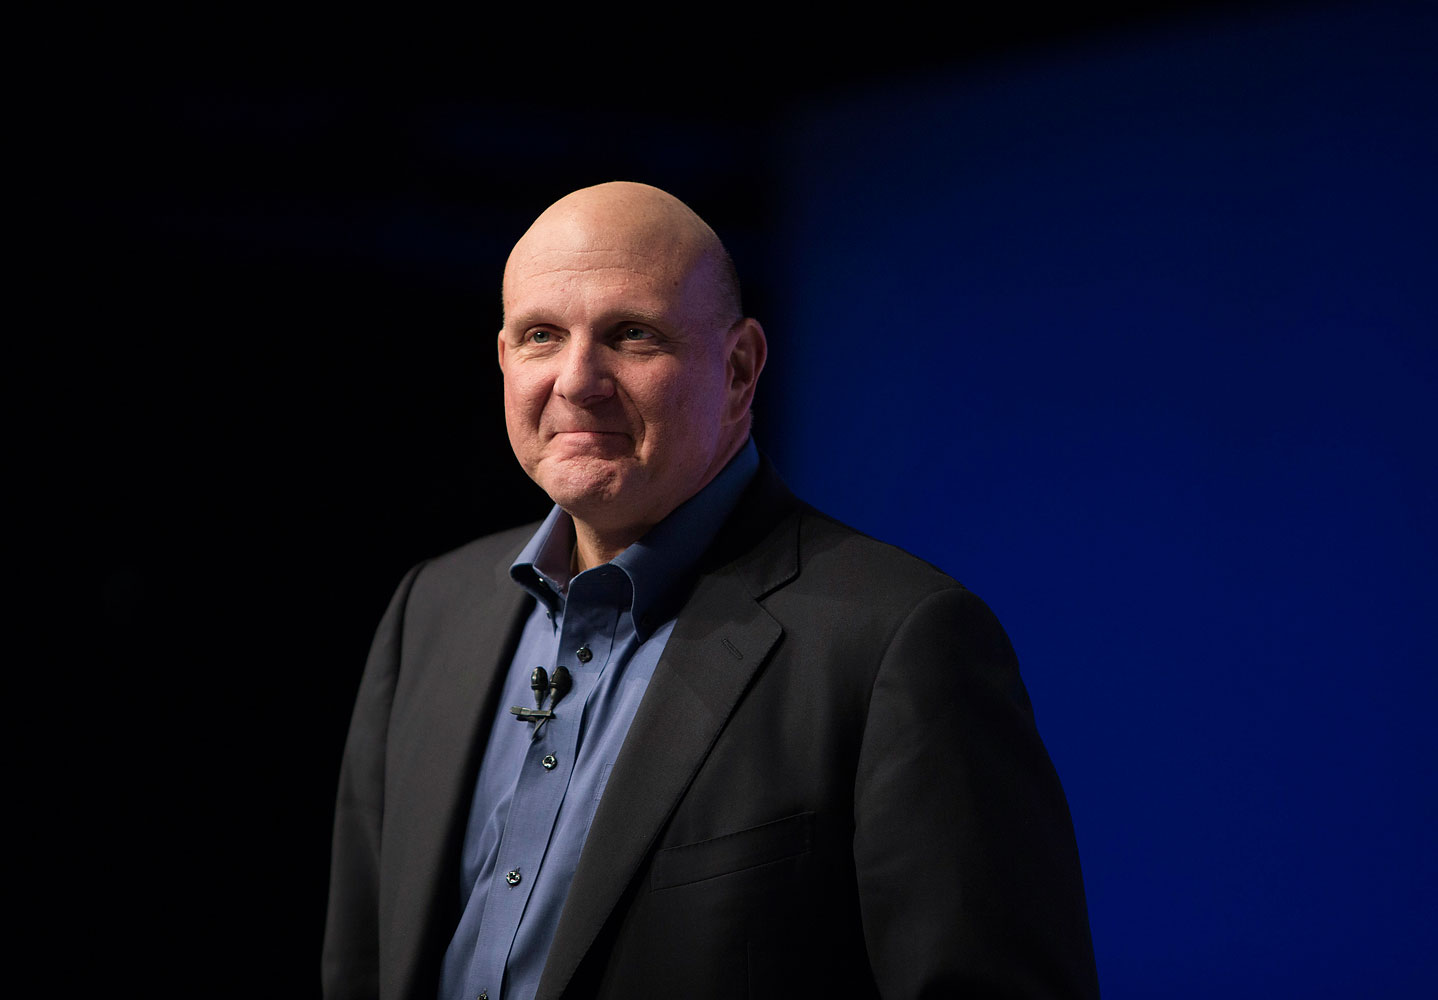 Steve Ballmer, chief executive officer of Microsoft Corp., pauses while speaking at an event in New York, Oct. 25, 2012. (Scott Eells—Bloomberg/Getty Images)